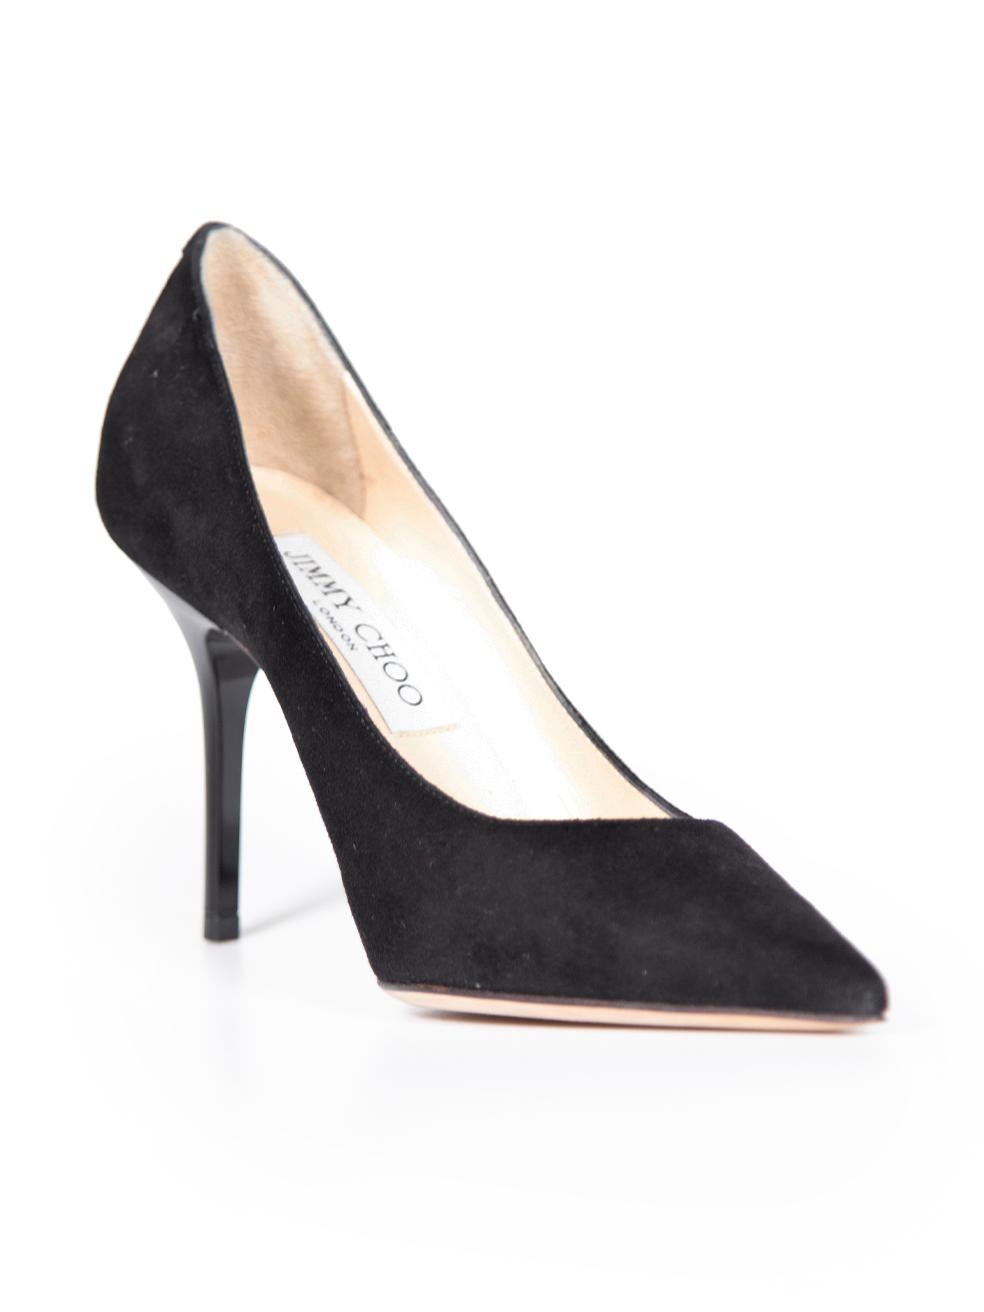 CONDITION is Very good. Minimal wear to shoes is evident. Minimal wear to both heels with very light abrasions to the suede on this used Jimmy Choo designer resale item.
 
 Details
 Black
 Suede
 Pumps
 Slip on
 Point toe
 High heeled
 
 
 Made in